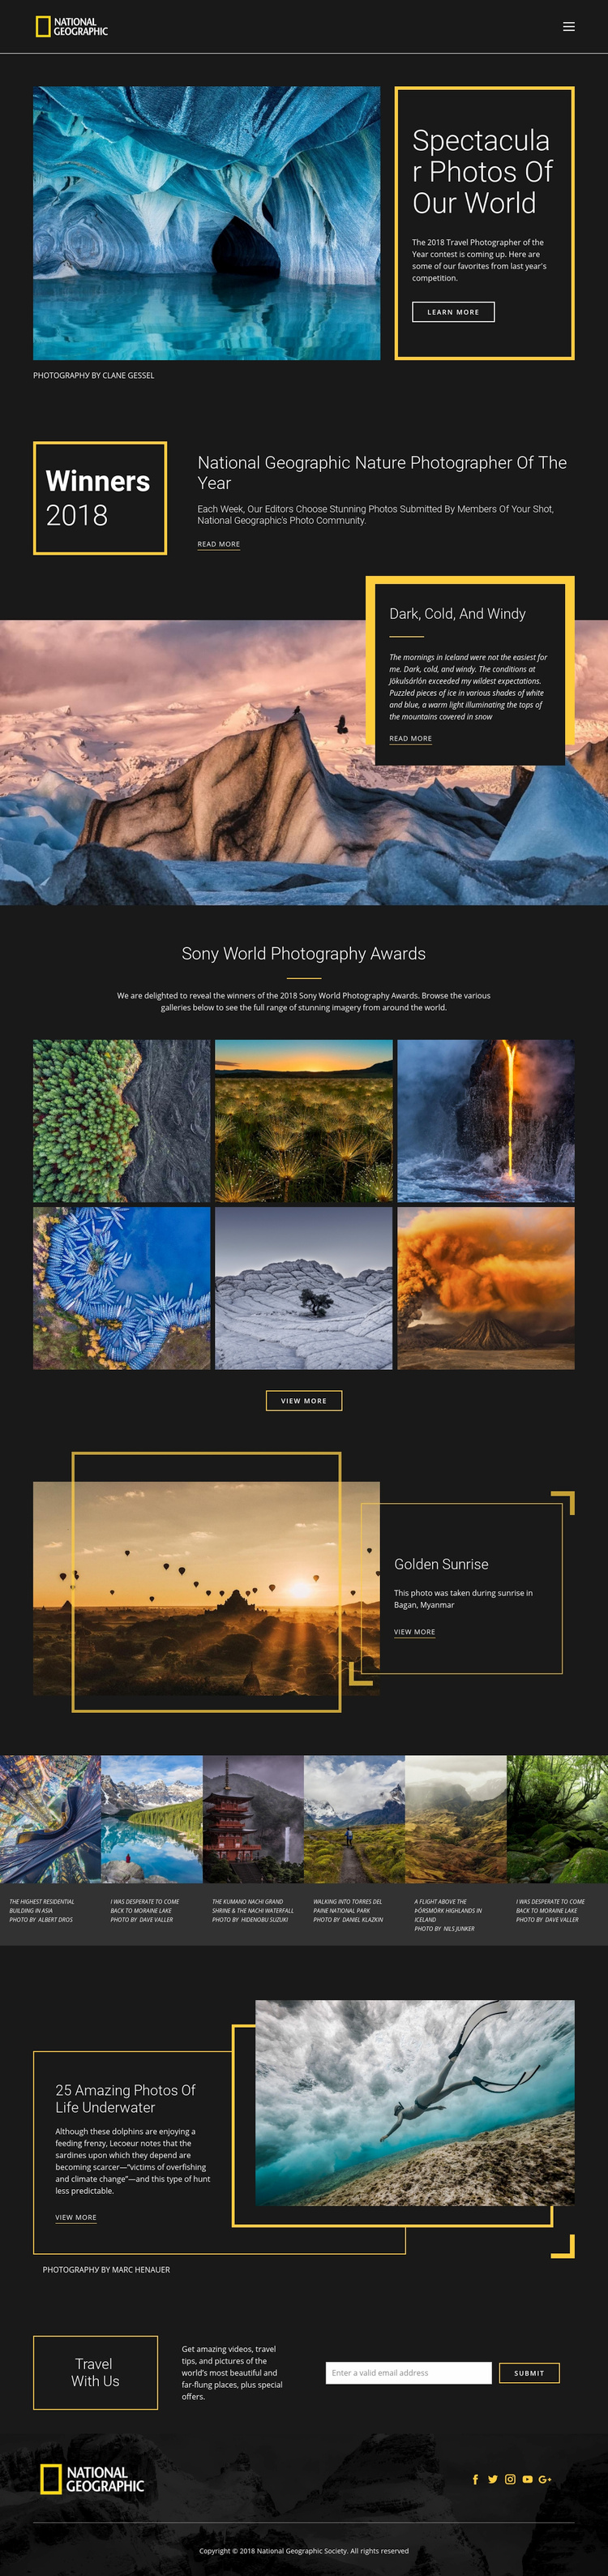 Pictures of nature Wix Template Alternative